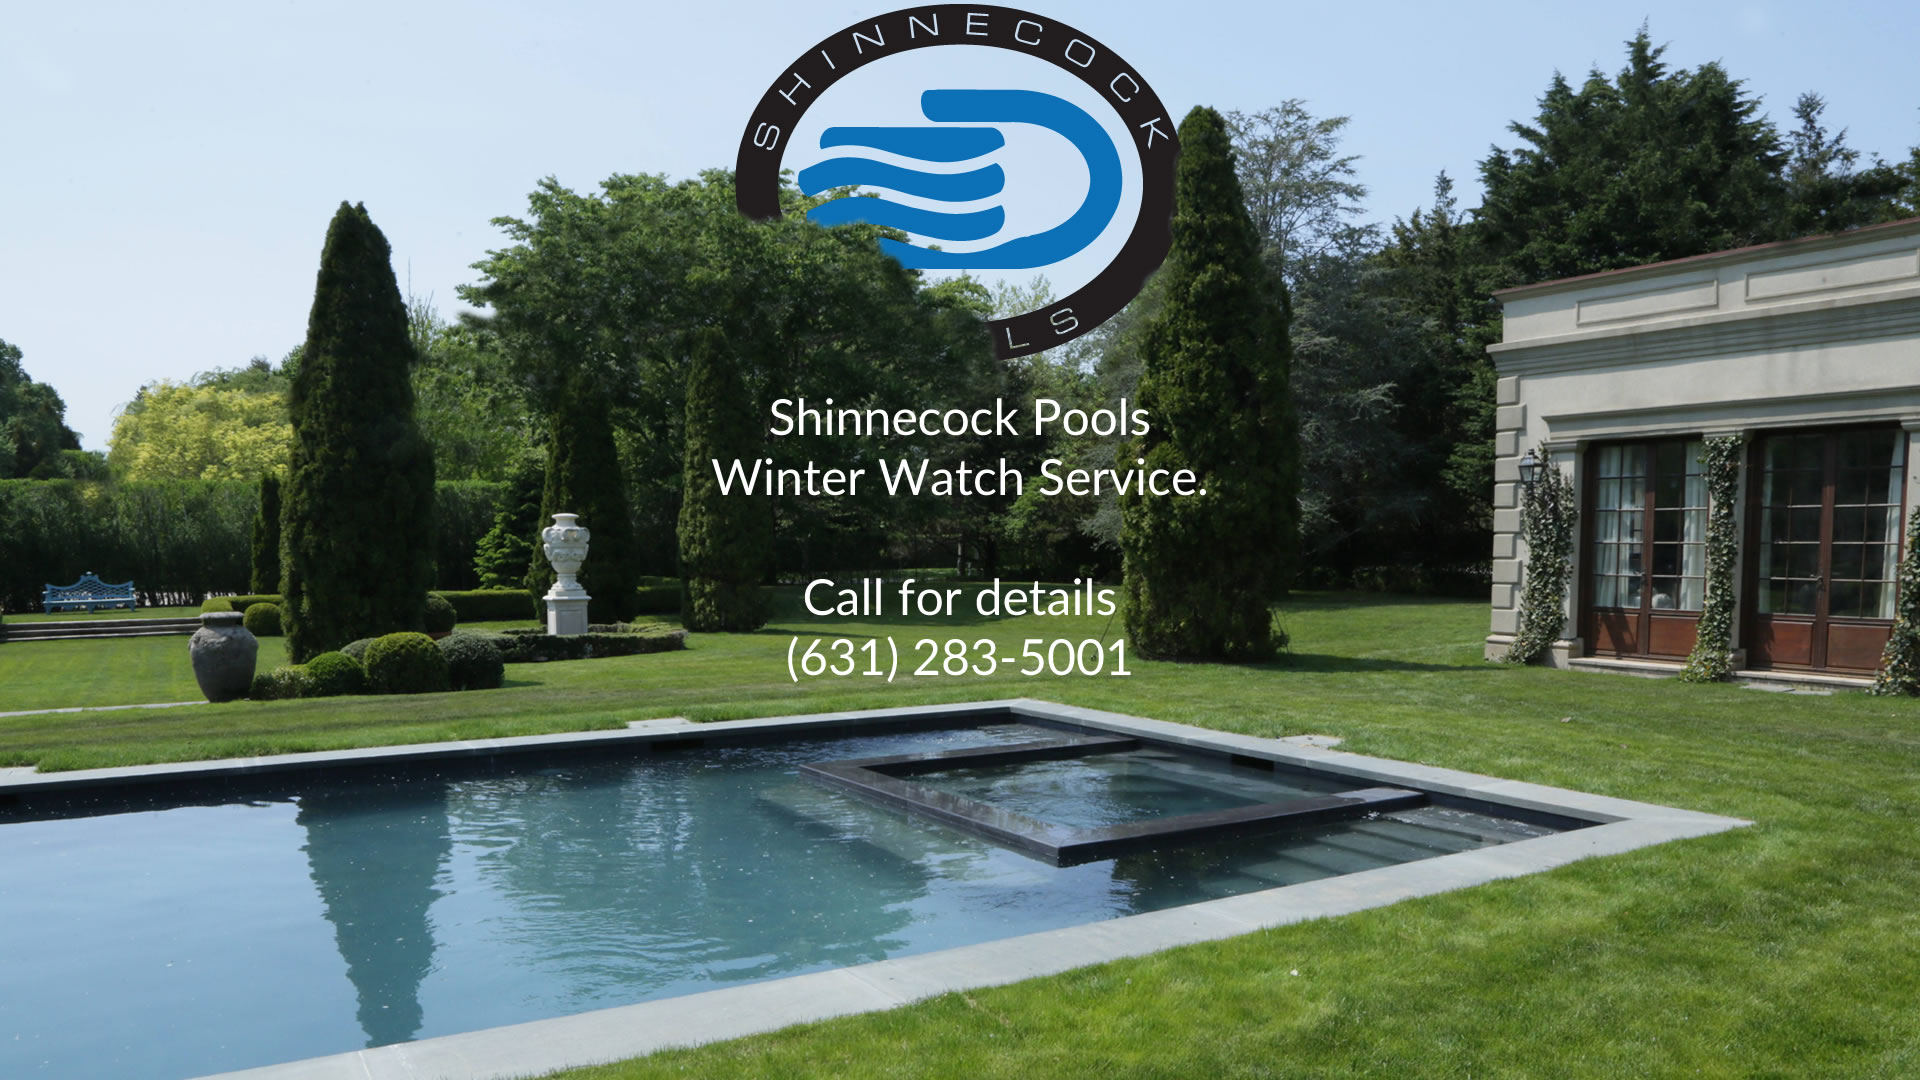 Shinnecock Pools Winter Watch Service, Call for details